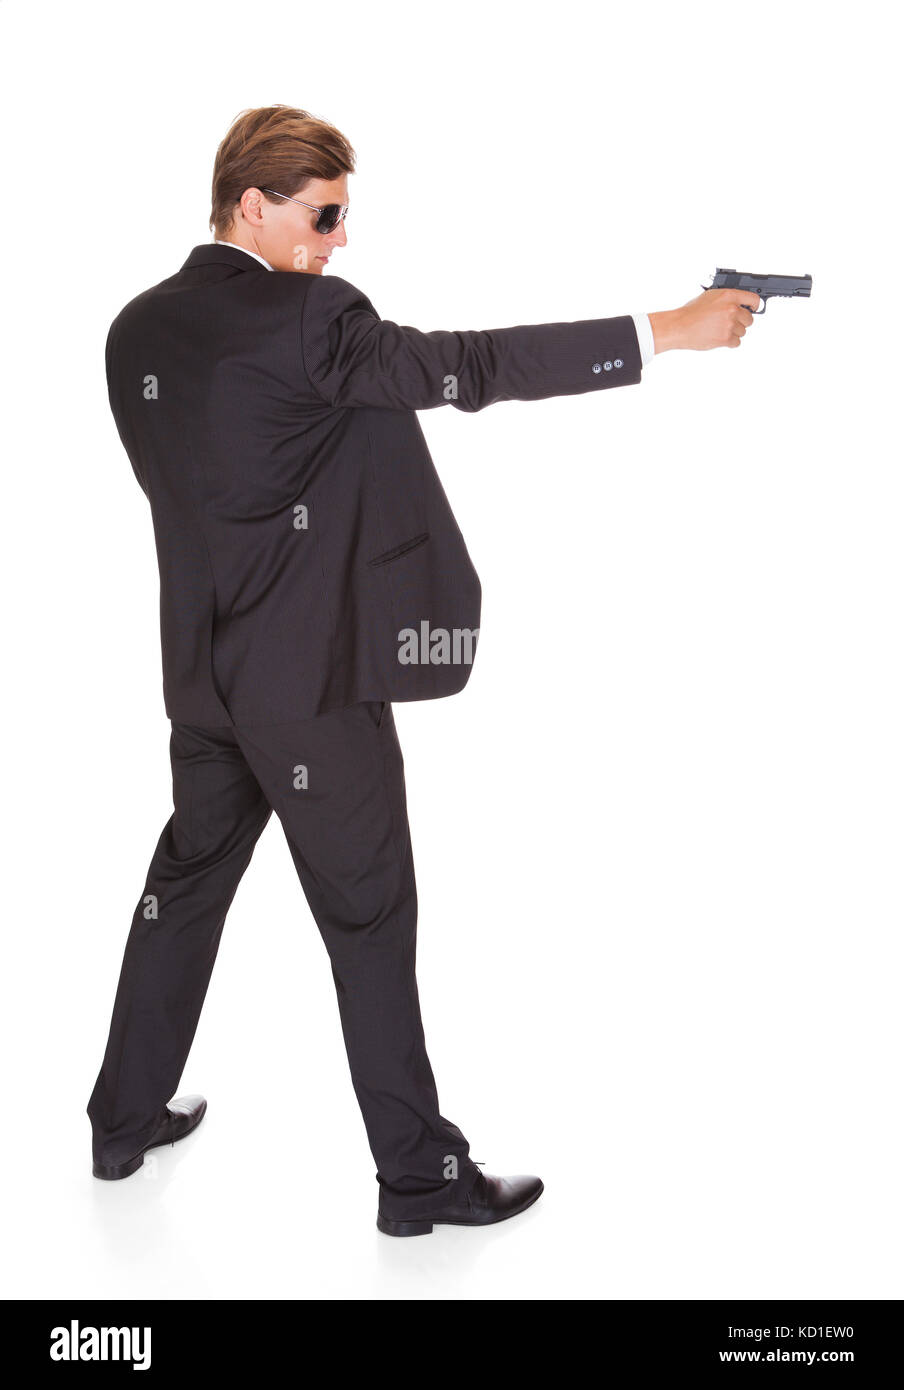 Young Man In Black Suit Aiming With A Gun On White Background Stock Photo